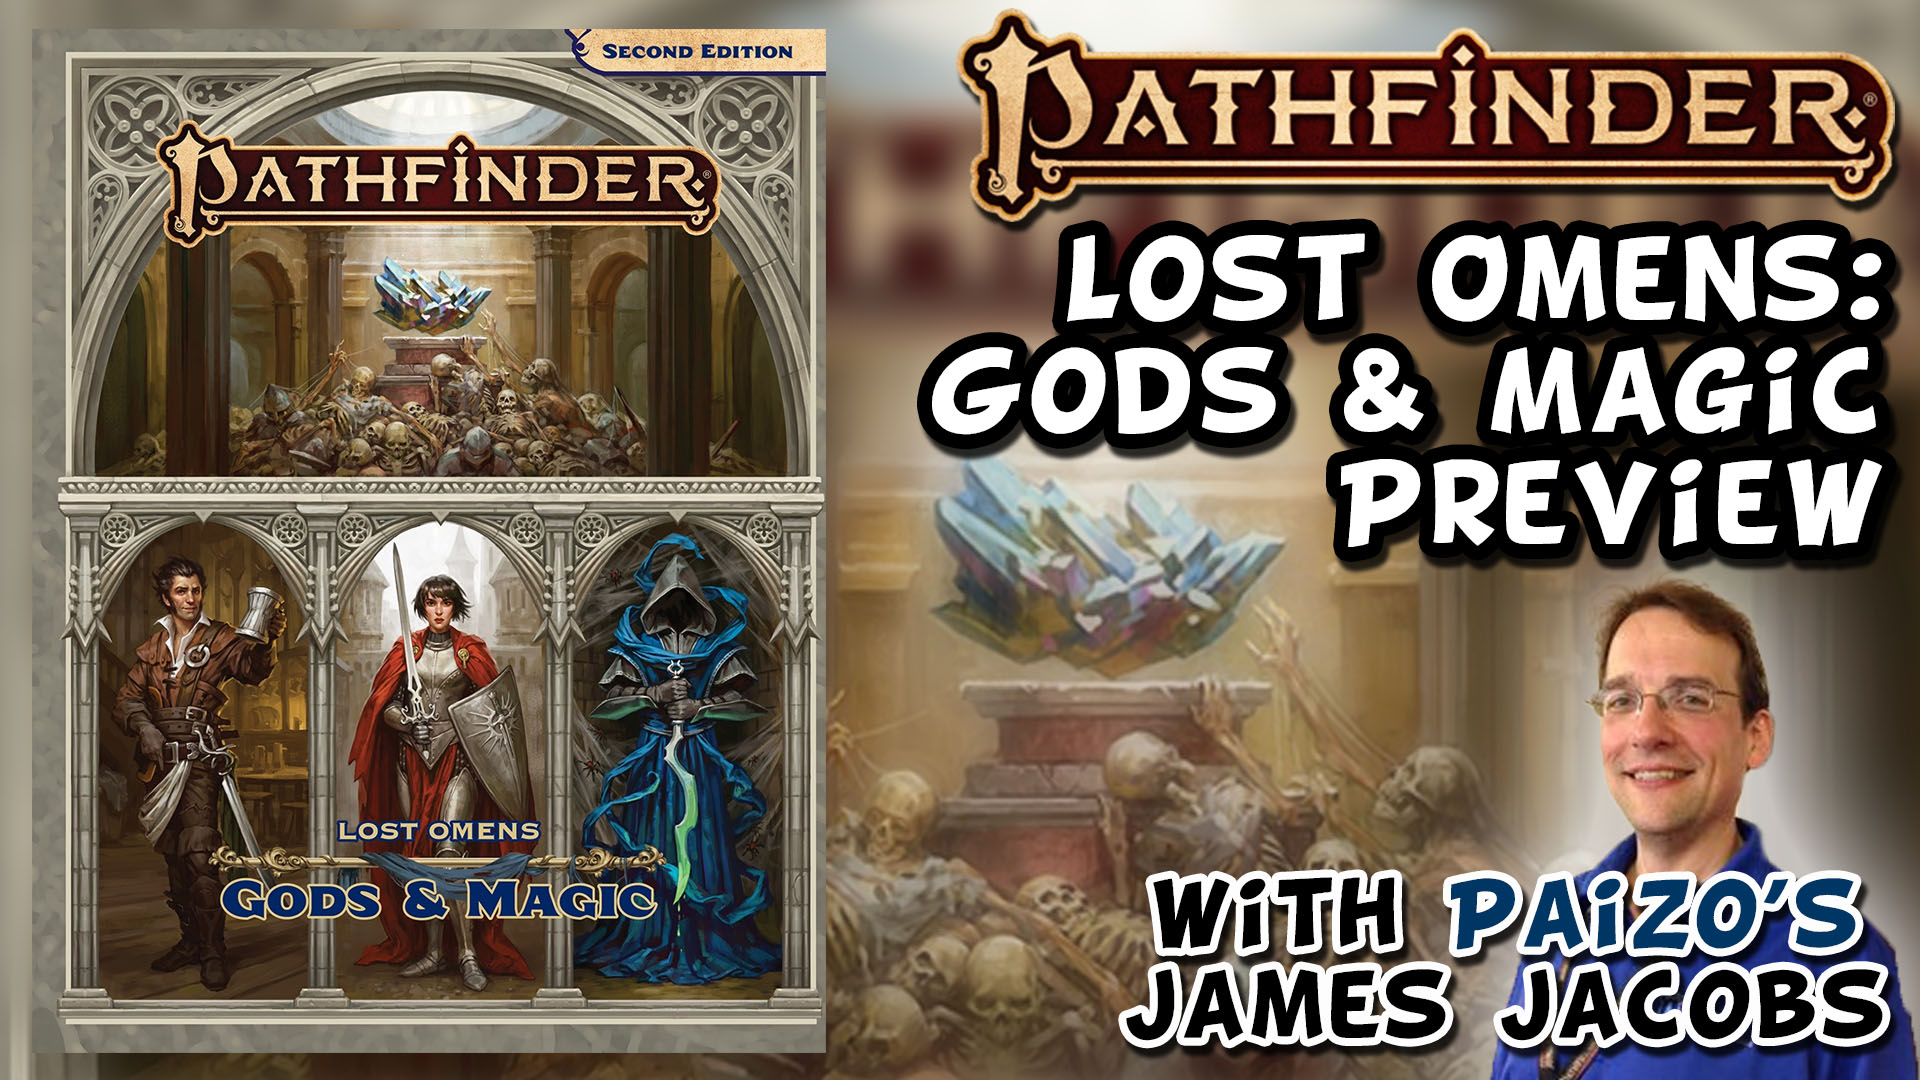 Pathfinder Lost Omens: Gods and MAgic Preview with Paizo's James Jacobs